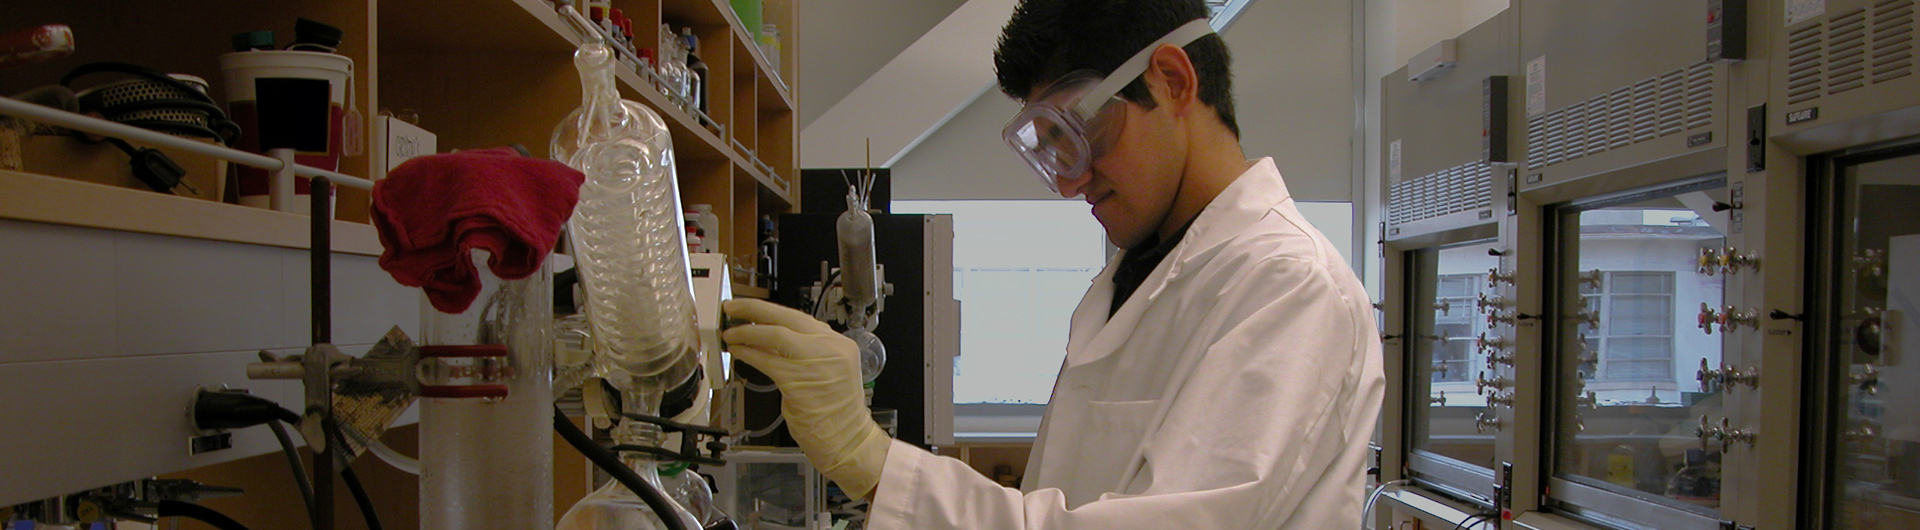 research student adjusting settings on lab equipment